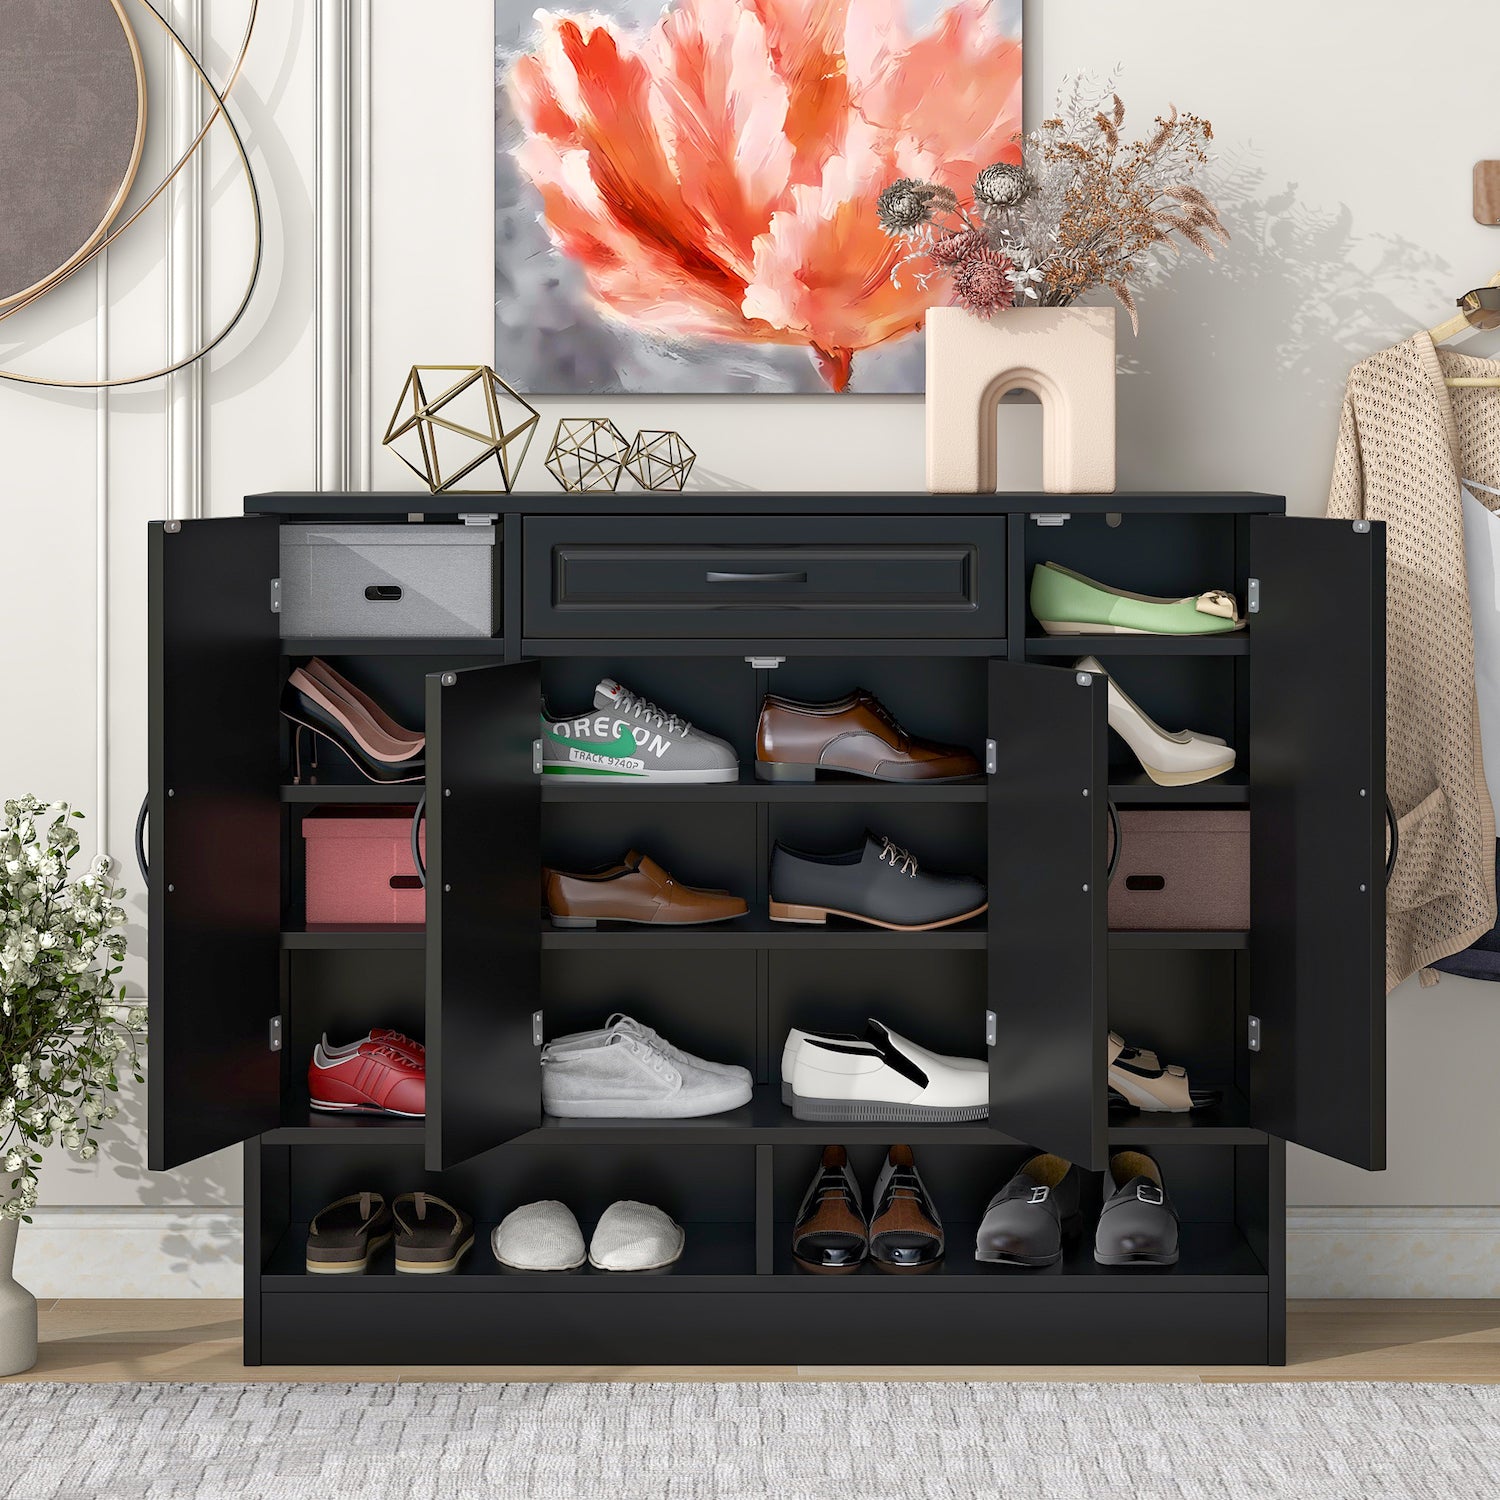 On-Trend Modern Entryway Cabinet with Shoe Storage - Black